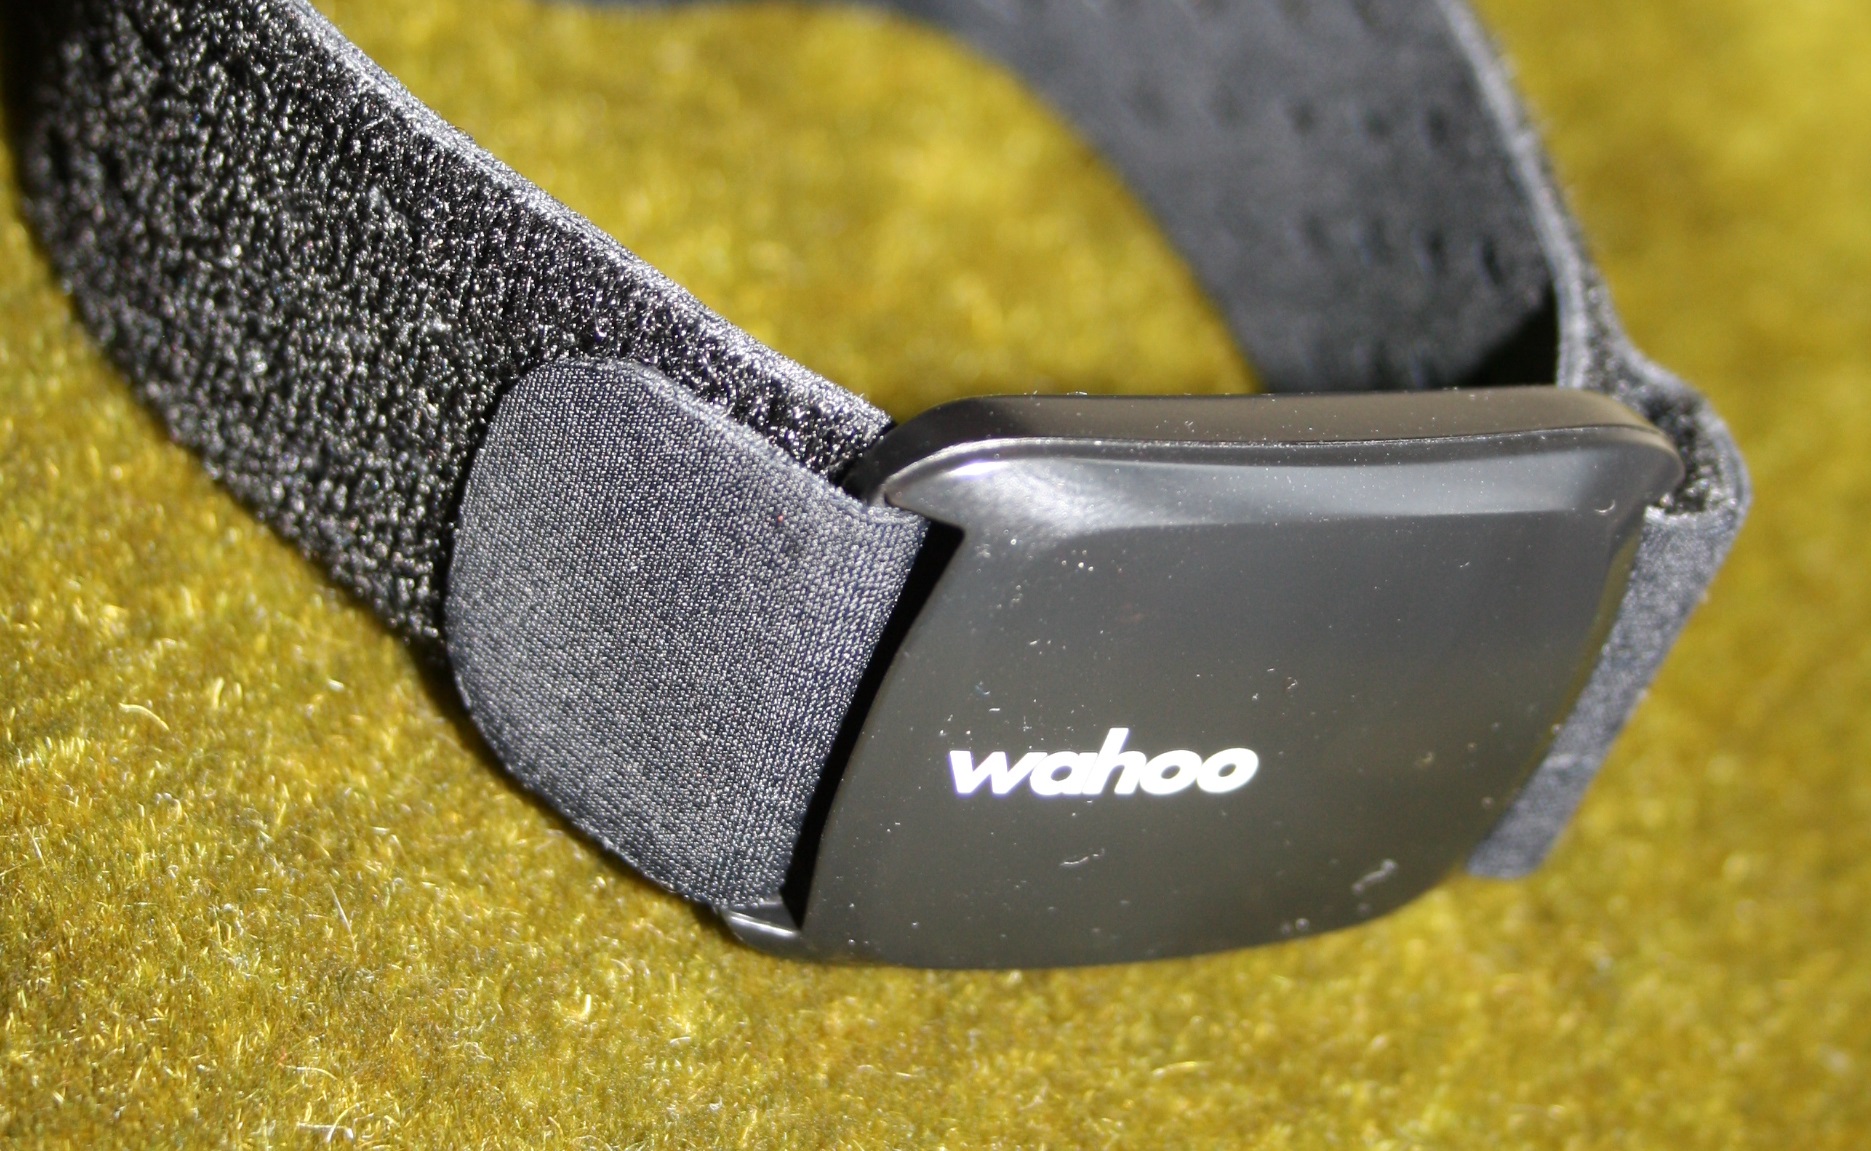 Wahoo Tickr Fit Review